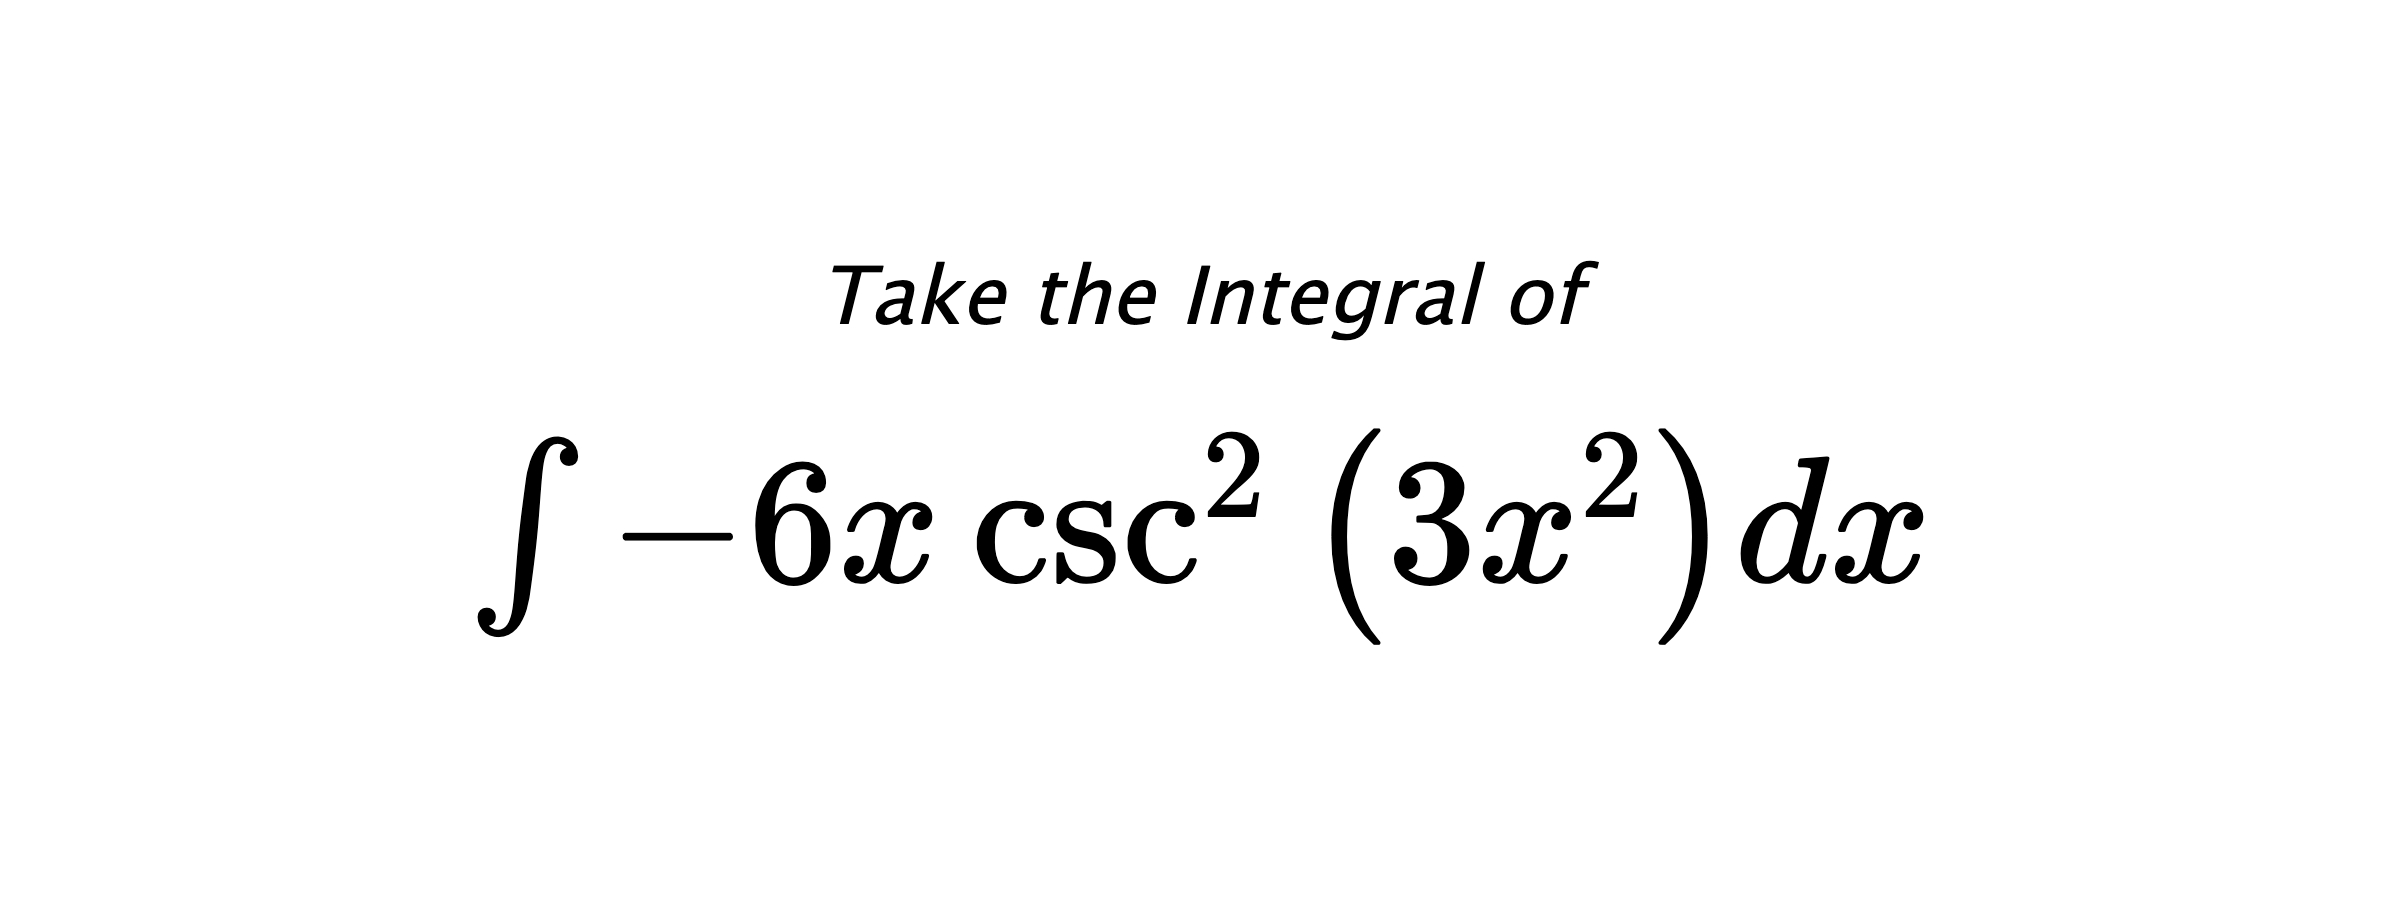 Take the Integral of $ \int - 6 x \csc^{2}{\left(3 x^{2} \right)} dx $